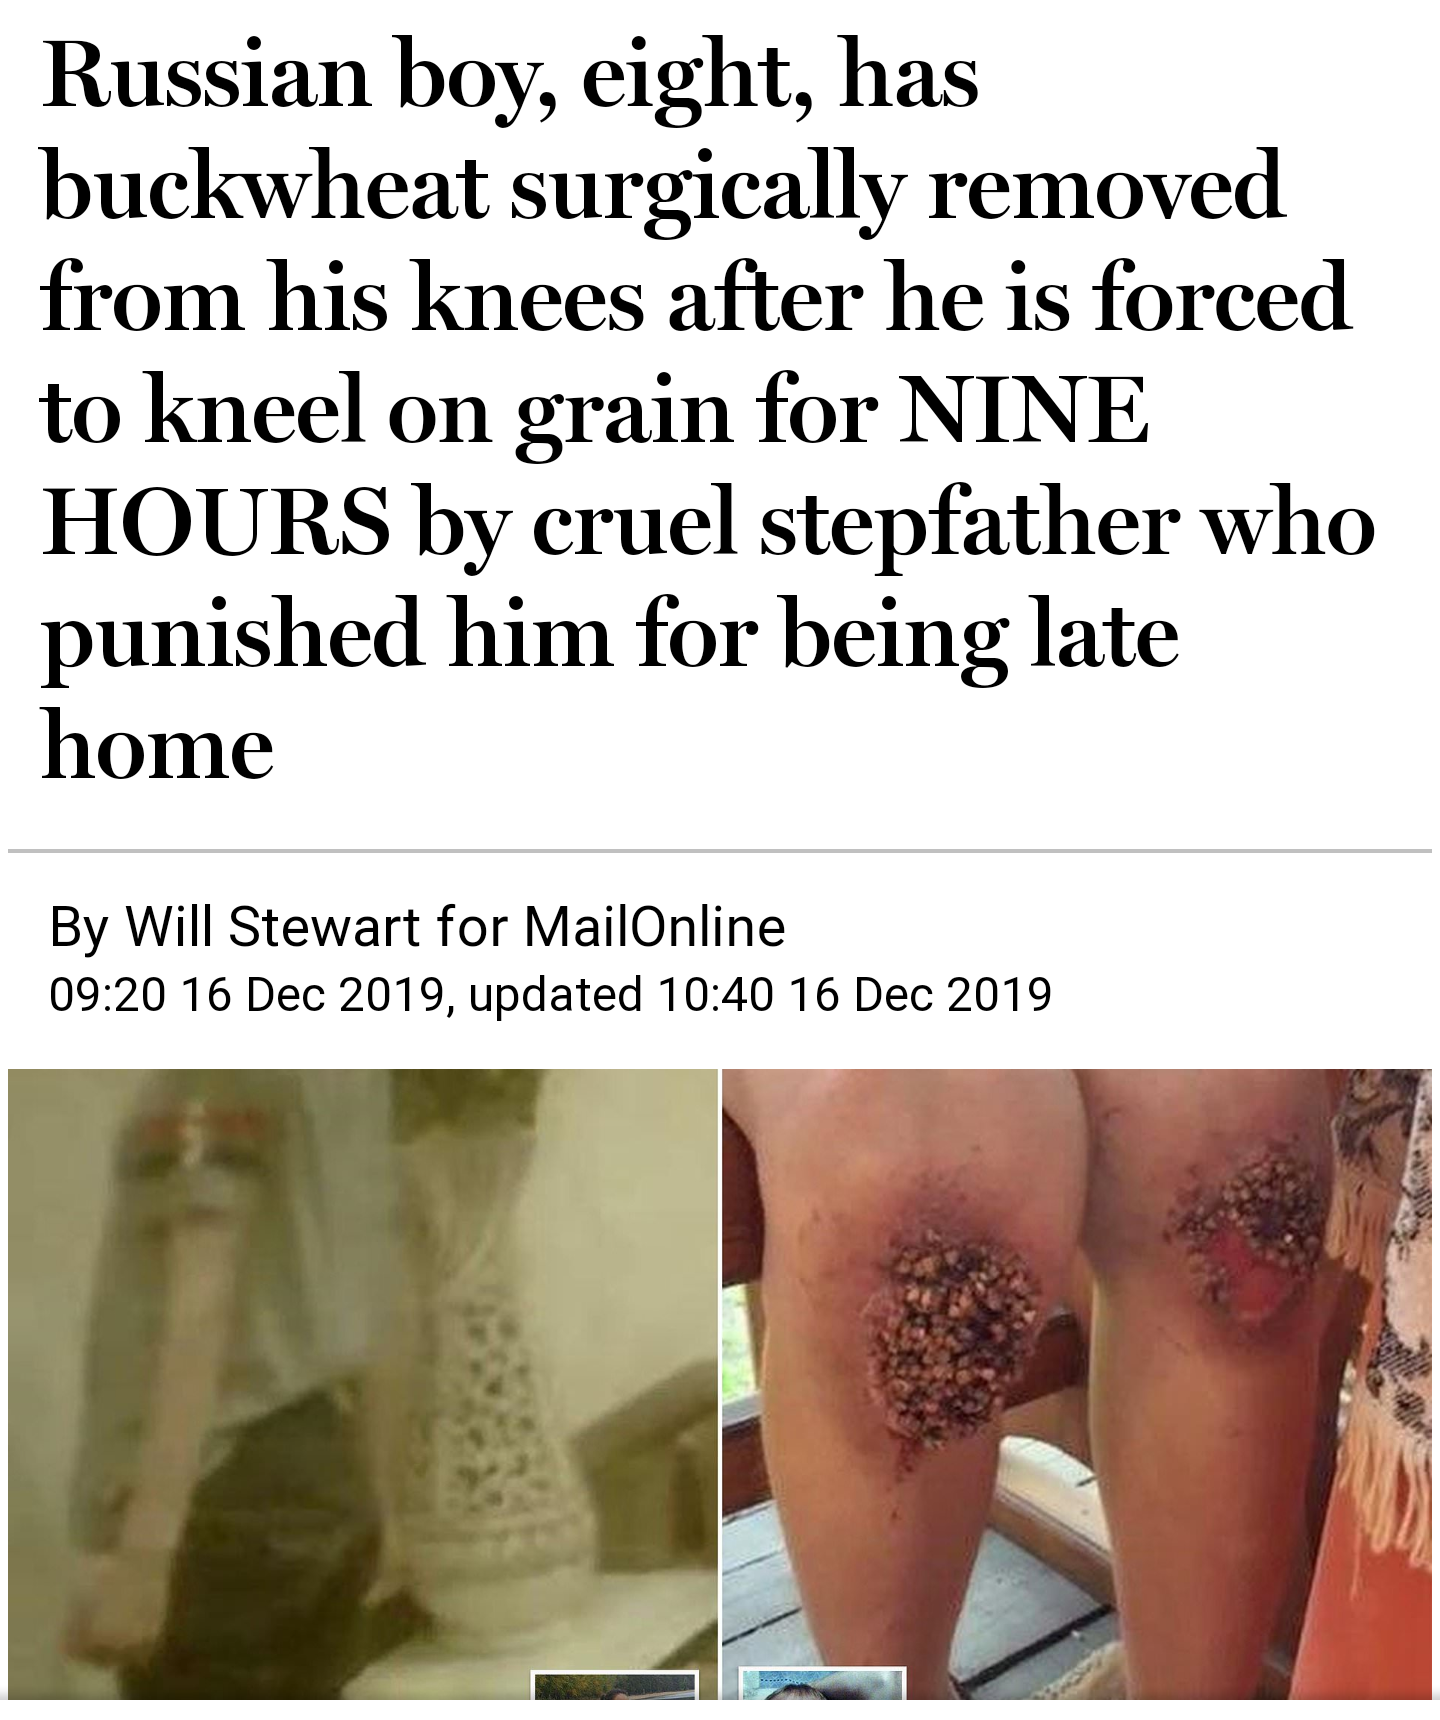 ephesians 2 8 10 - Russian boy, eight, has buckwheat surgically removed from his knees after he is forced to kneel on grain for Nine Hours by cruel stepfather who punished him for being late home By Will Stewart for MailOnline , updated